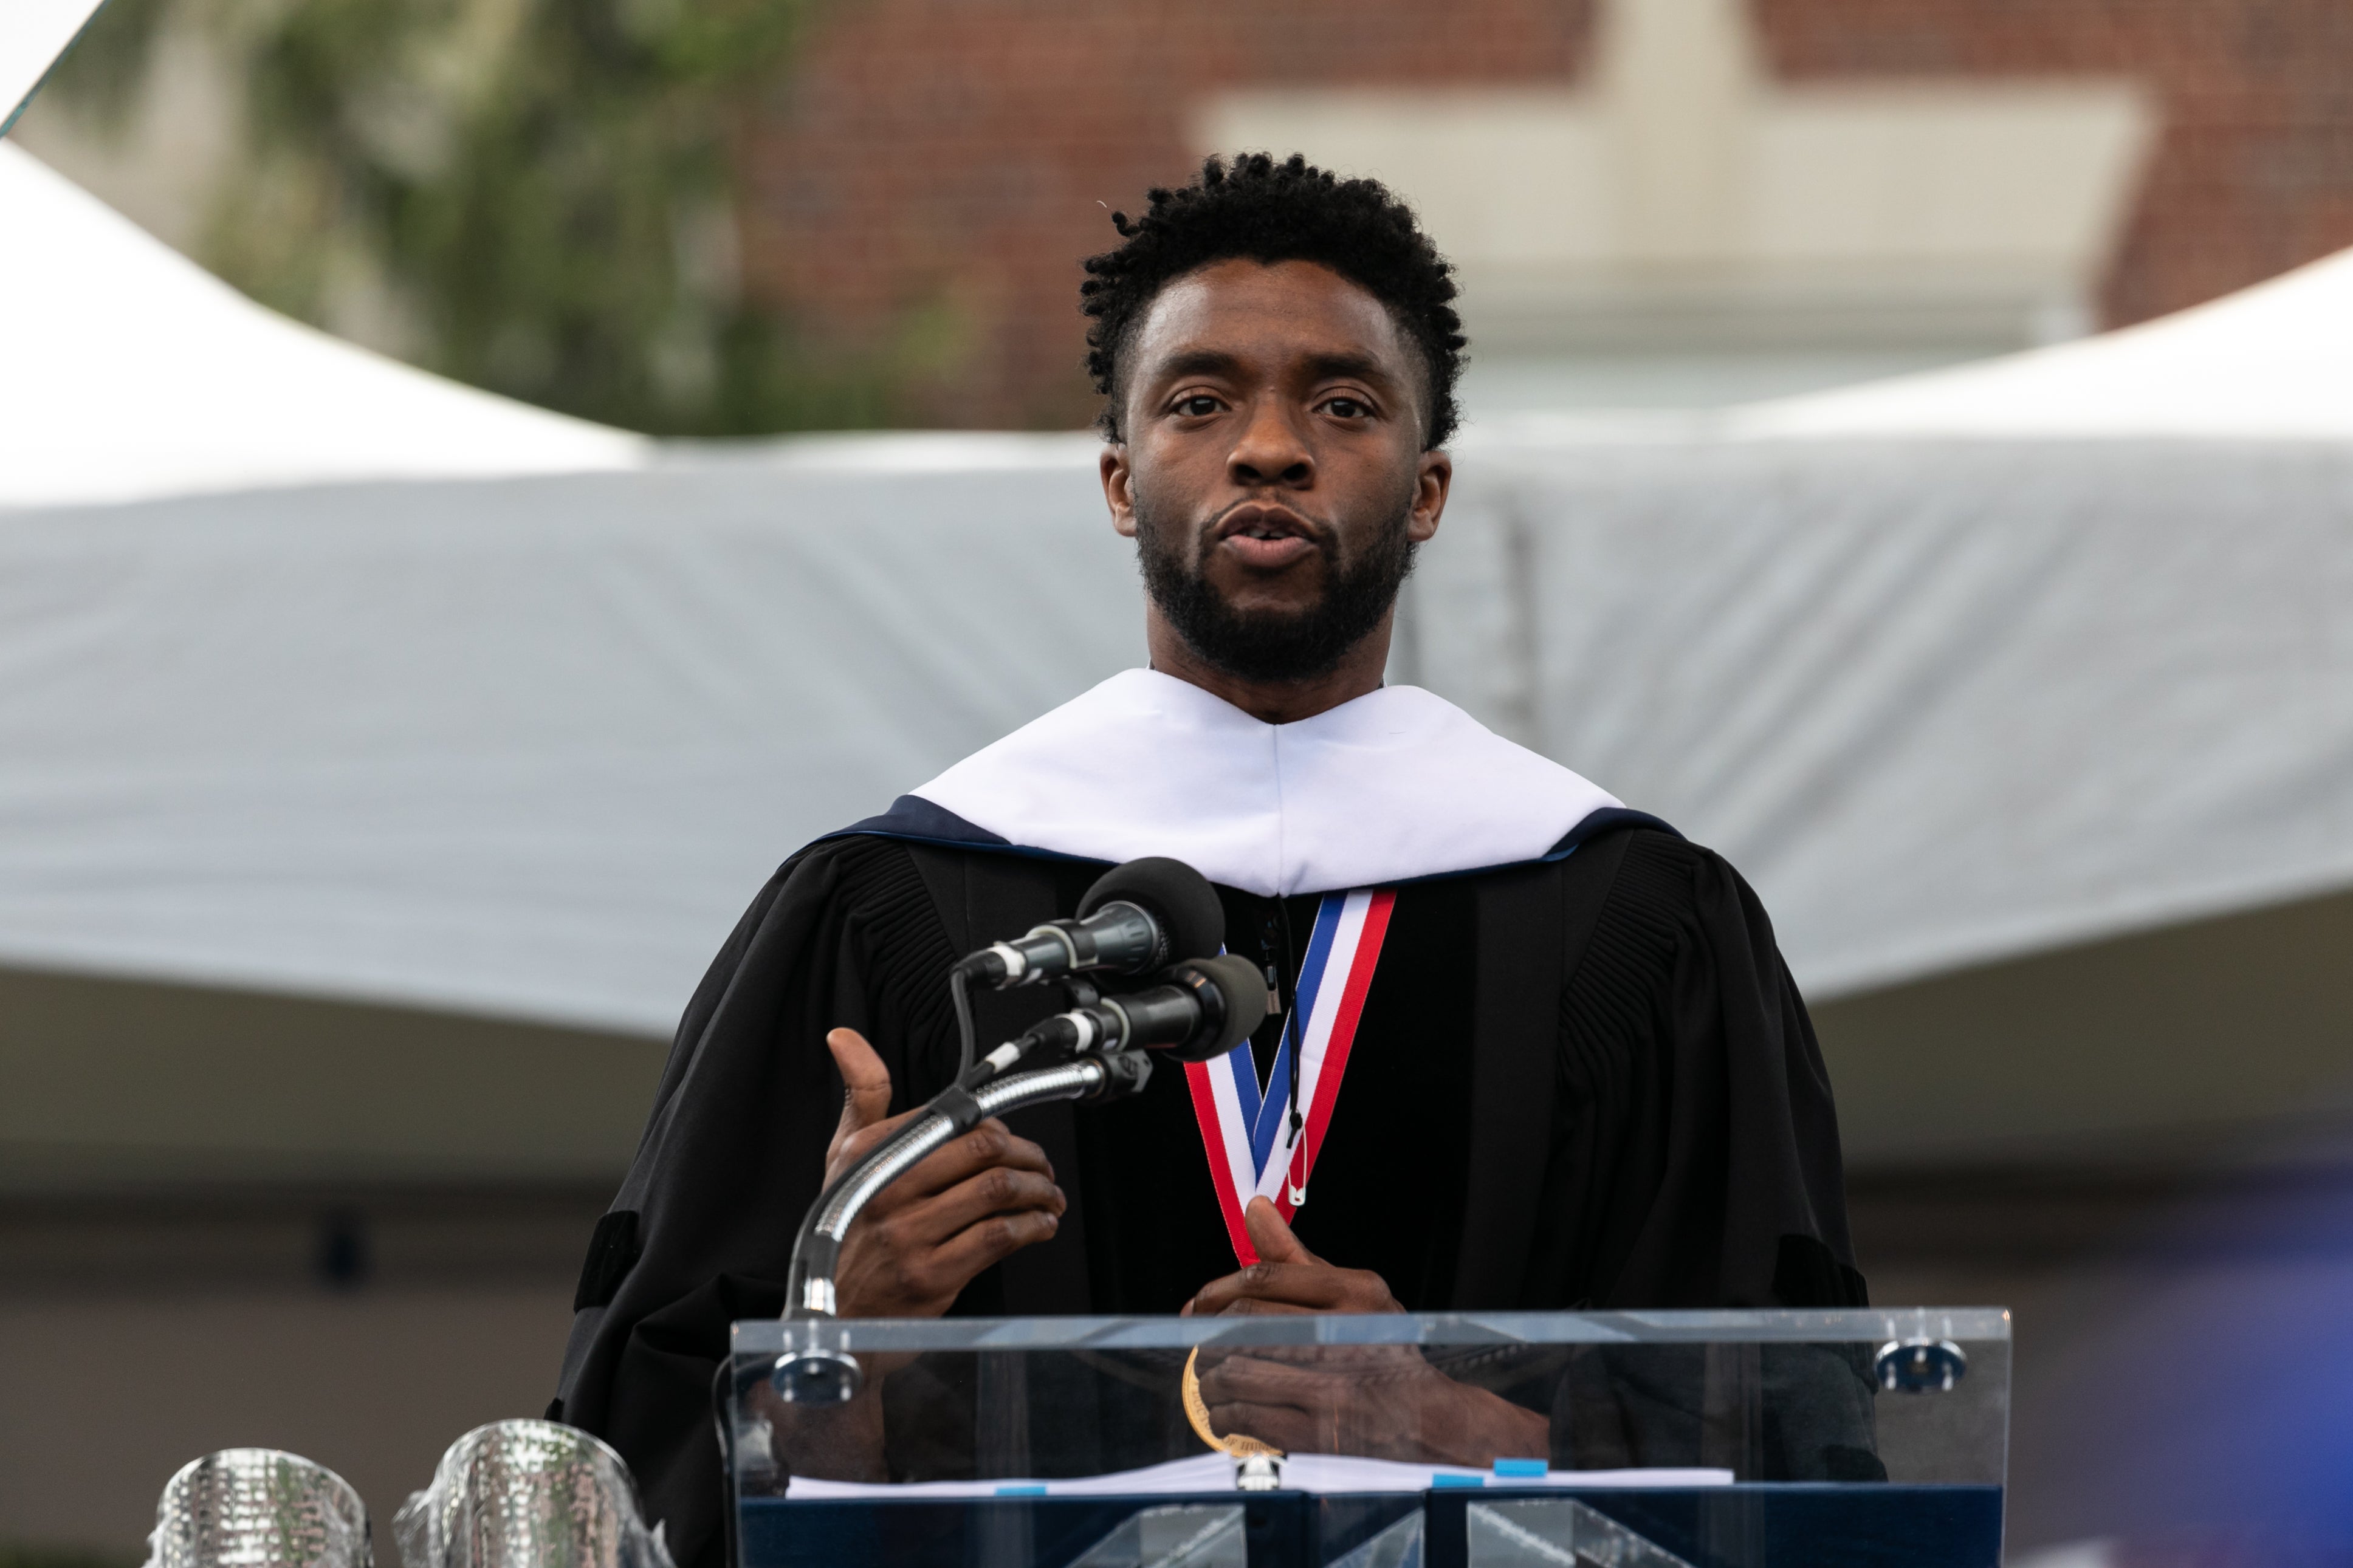 Words Of Wisdom: Black Celebs Give Life Advice In 2018 Commencement Speeches
